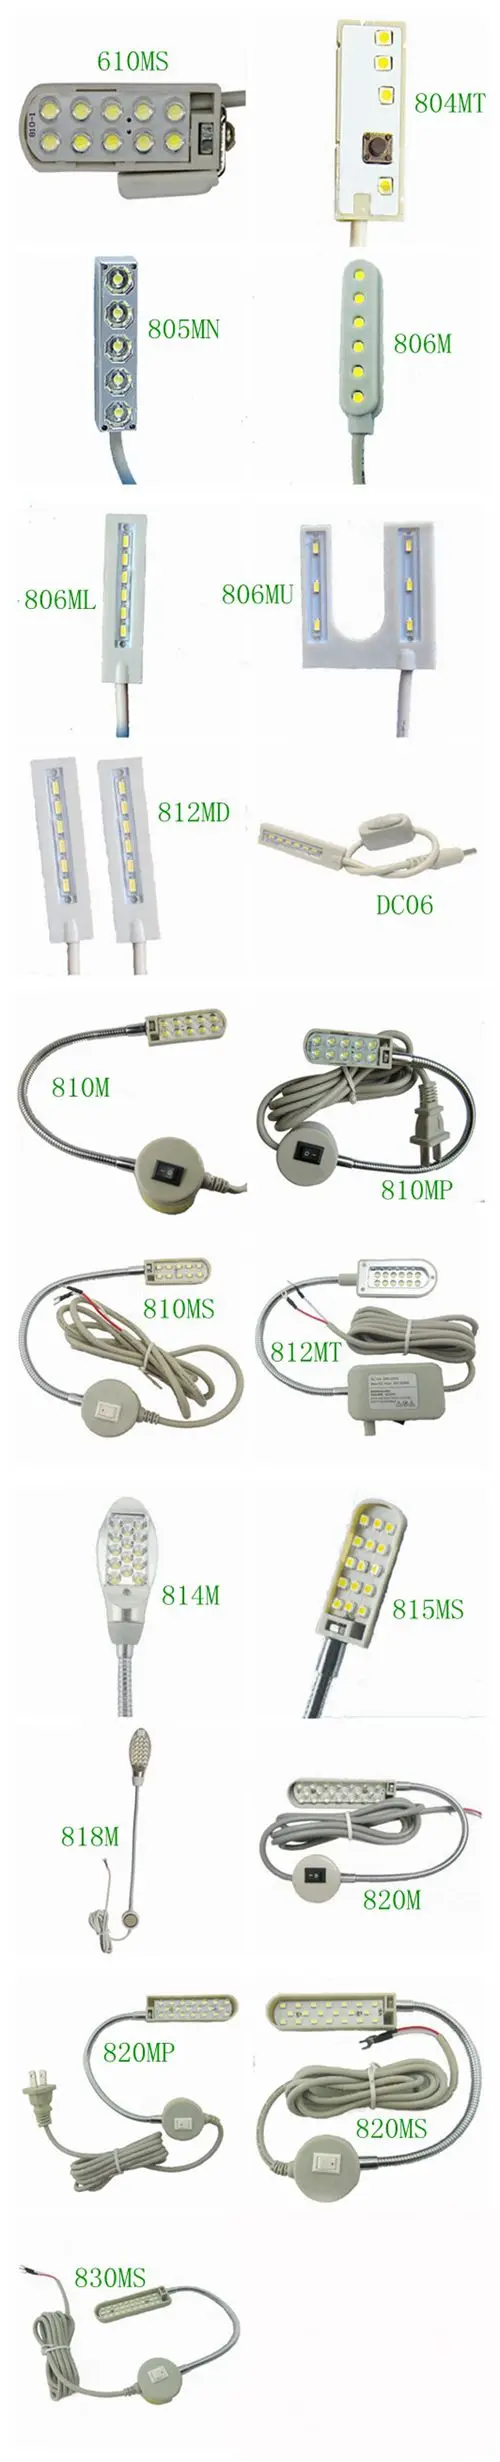 industrial sewing machine led light